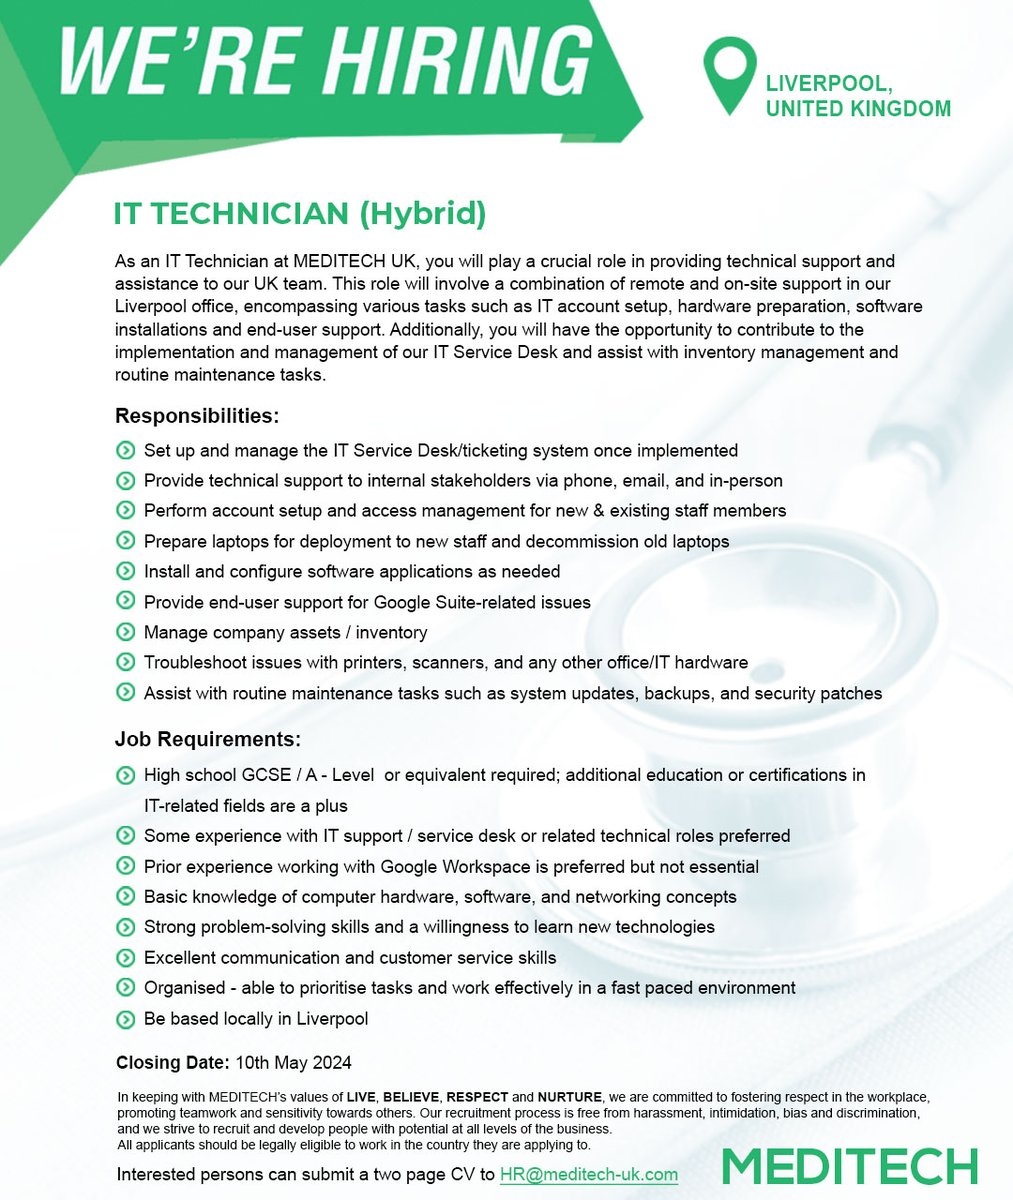 MEDITECH UK is looking for an  IT Technician to join our growing team. If you have a passion for technology and a desire to grow in the field of IT  - we would love to hear from you! For more information, please reach out to HR@meditech-uk.com. #jointheteam #MEDITECHcareers